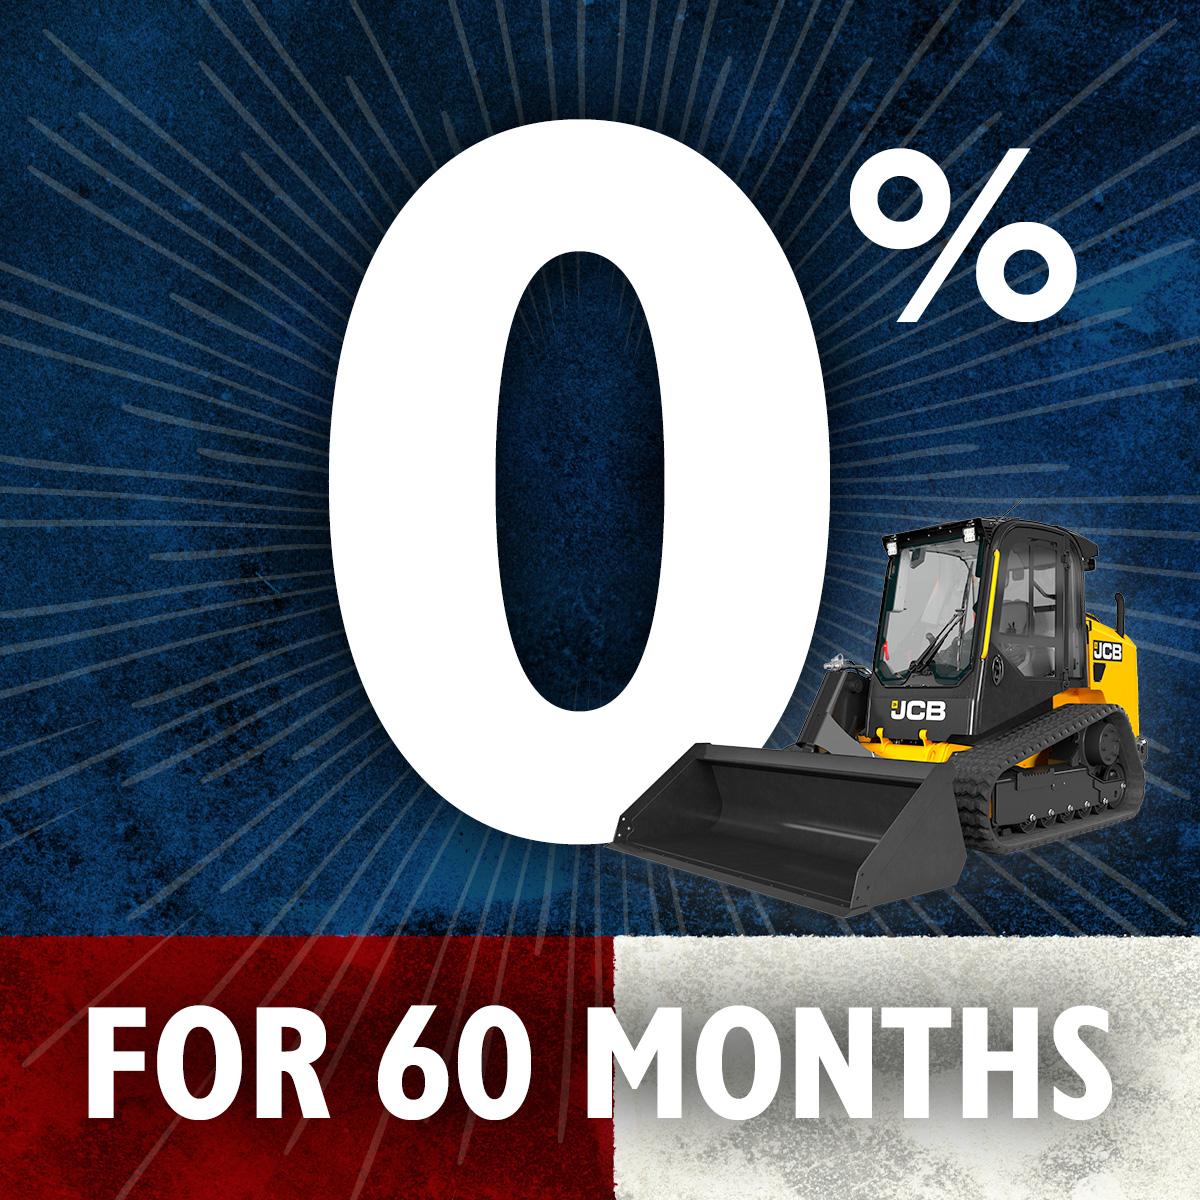 JCB – COMPACT TRACK LOADERS – 0% FOR 60 MONTHS